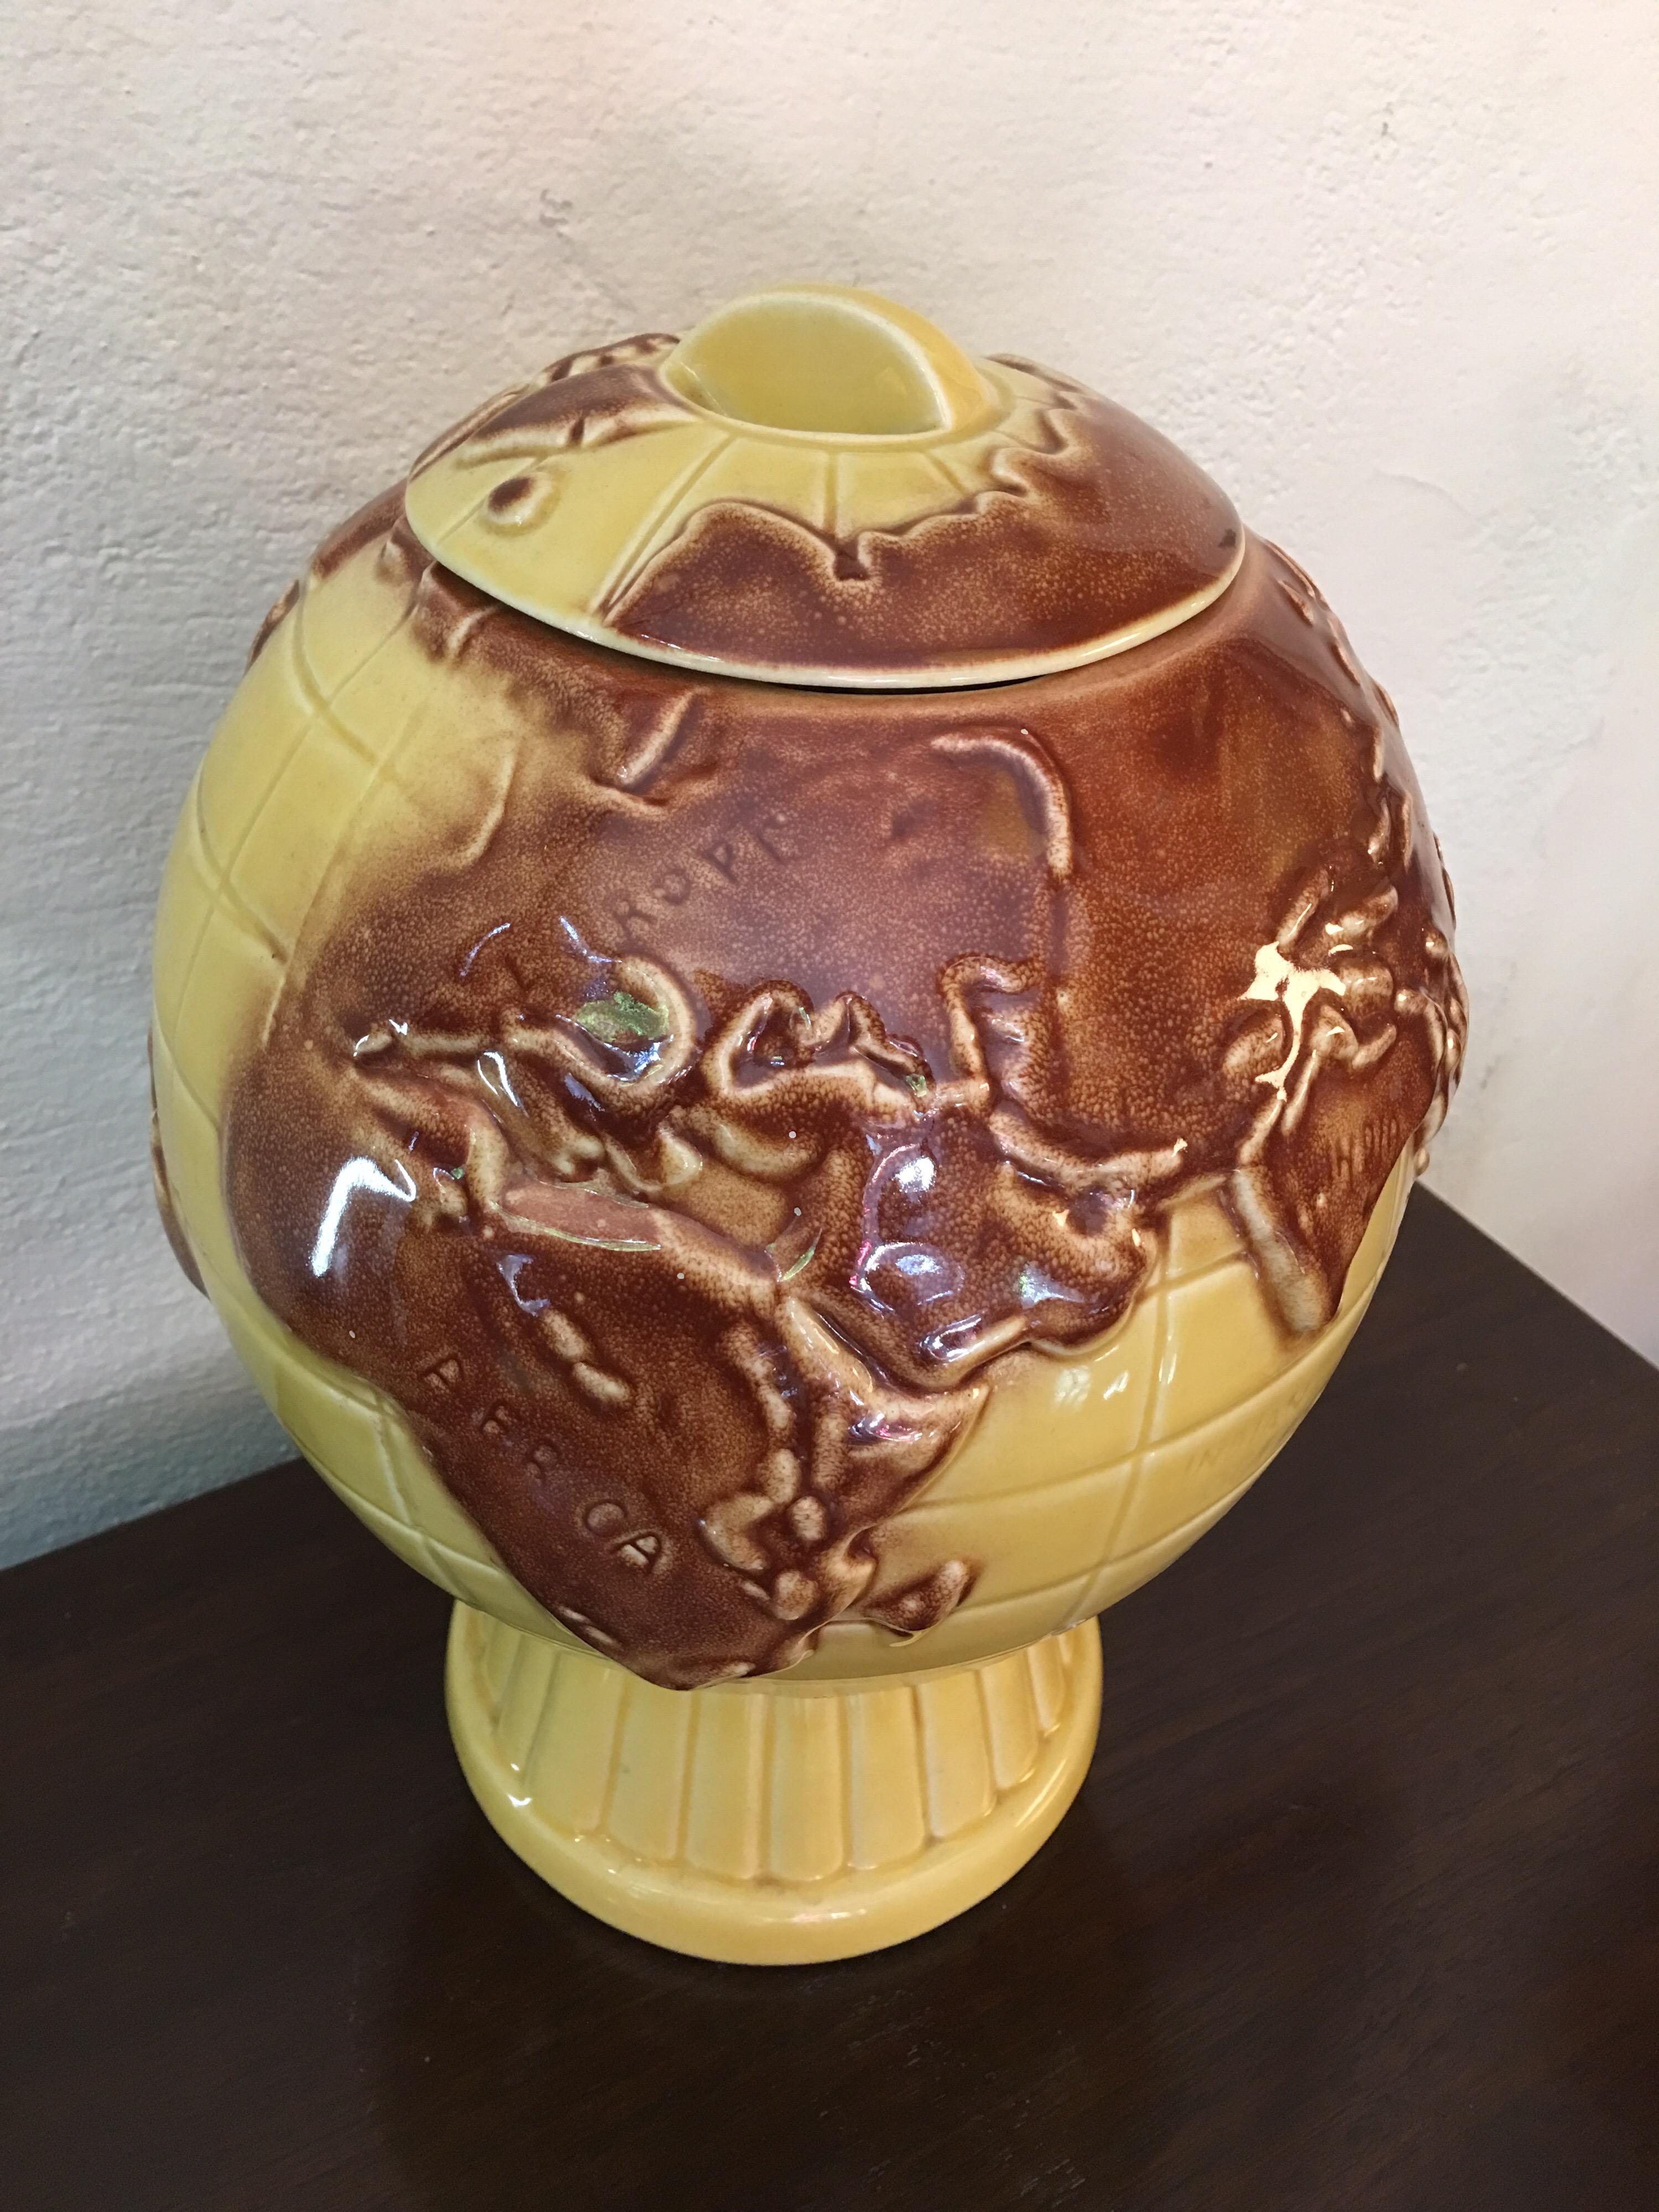 Ceramic globe cookie jar in shades of yellow and brown. Whimsical, clever cookie jar in great shape. No maker's mark to bottom but I would guess a late 1960s-early 1970s design.